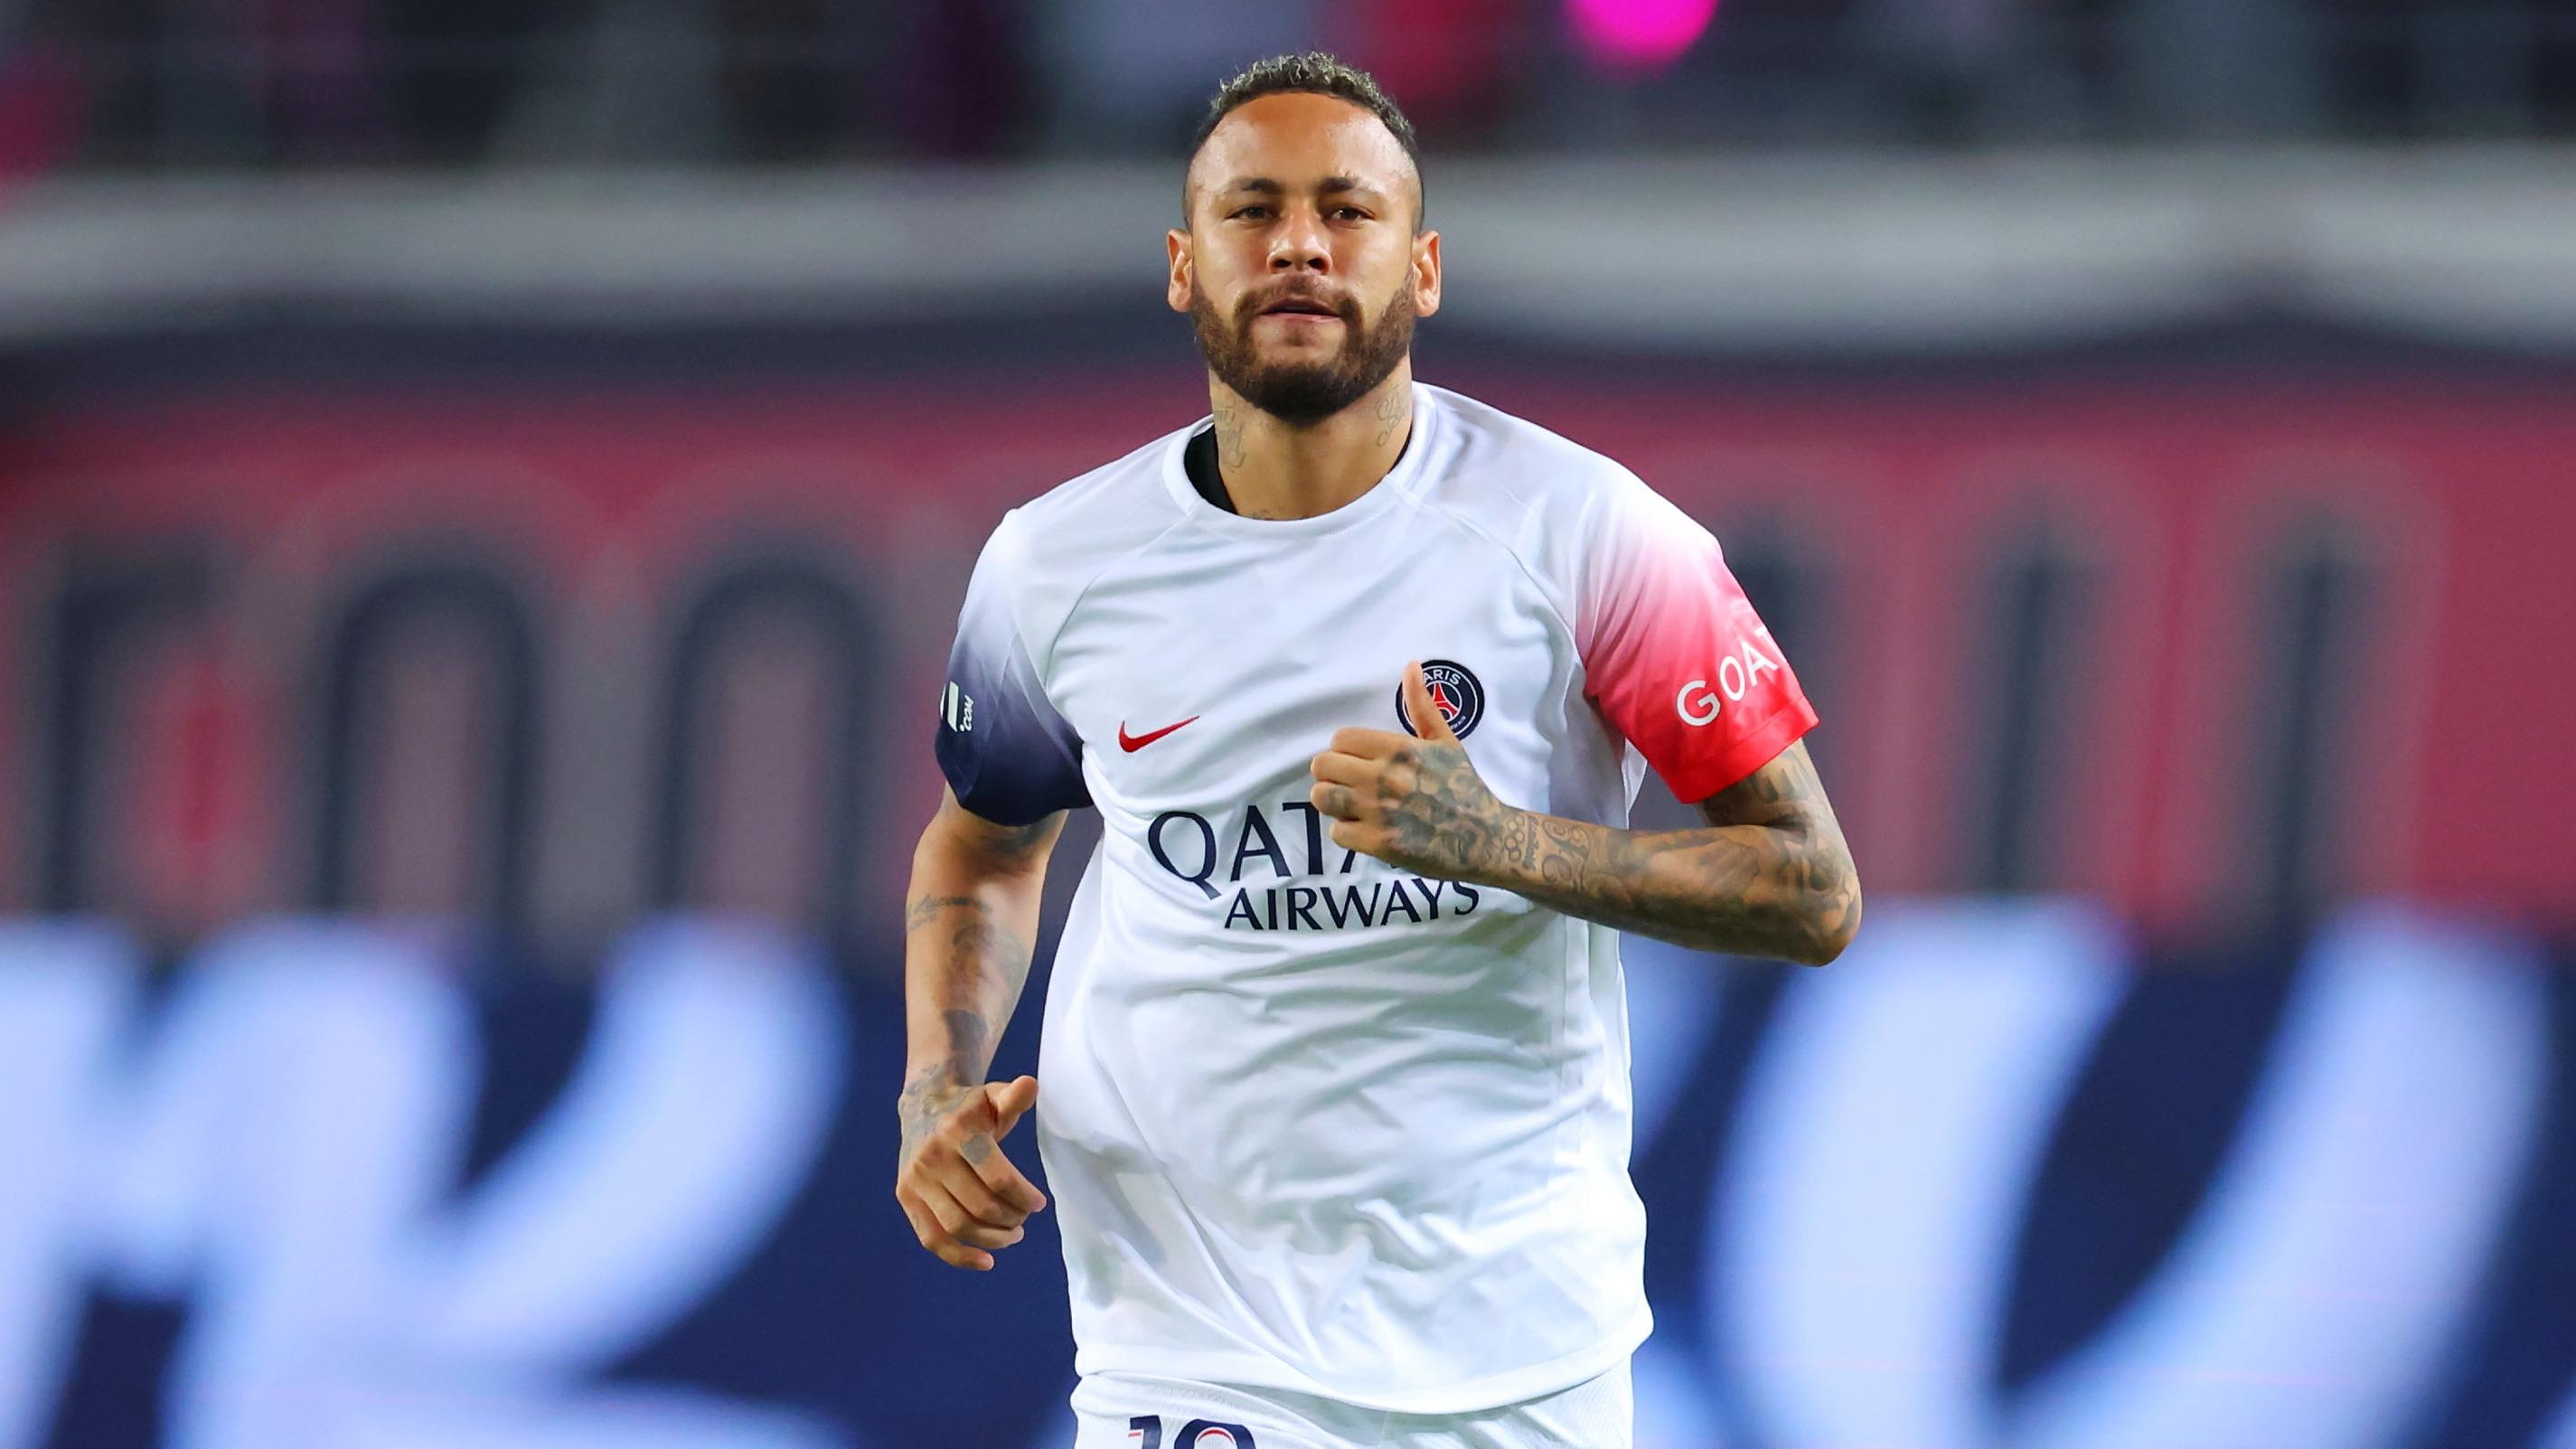 PSG: justice suspects the club of tax advantages after the transfer of Neymar in 2017